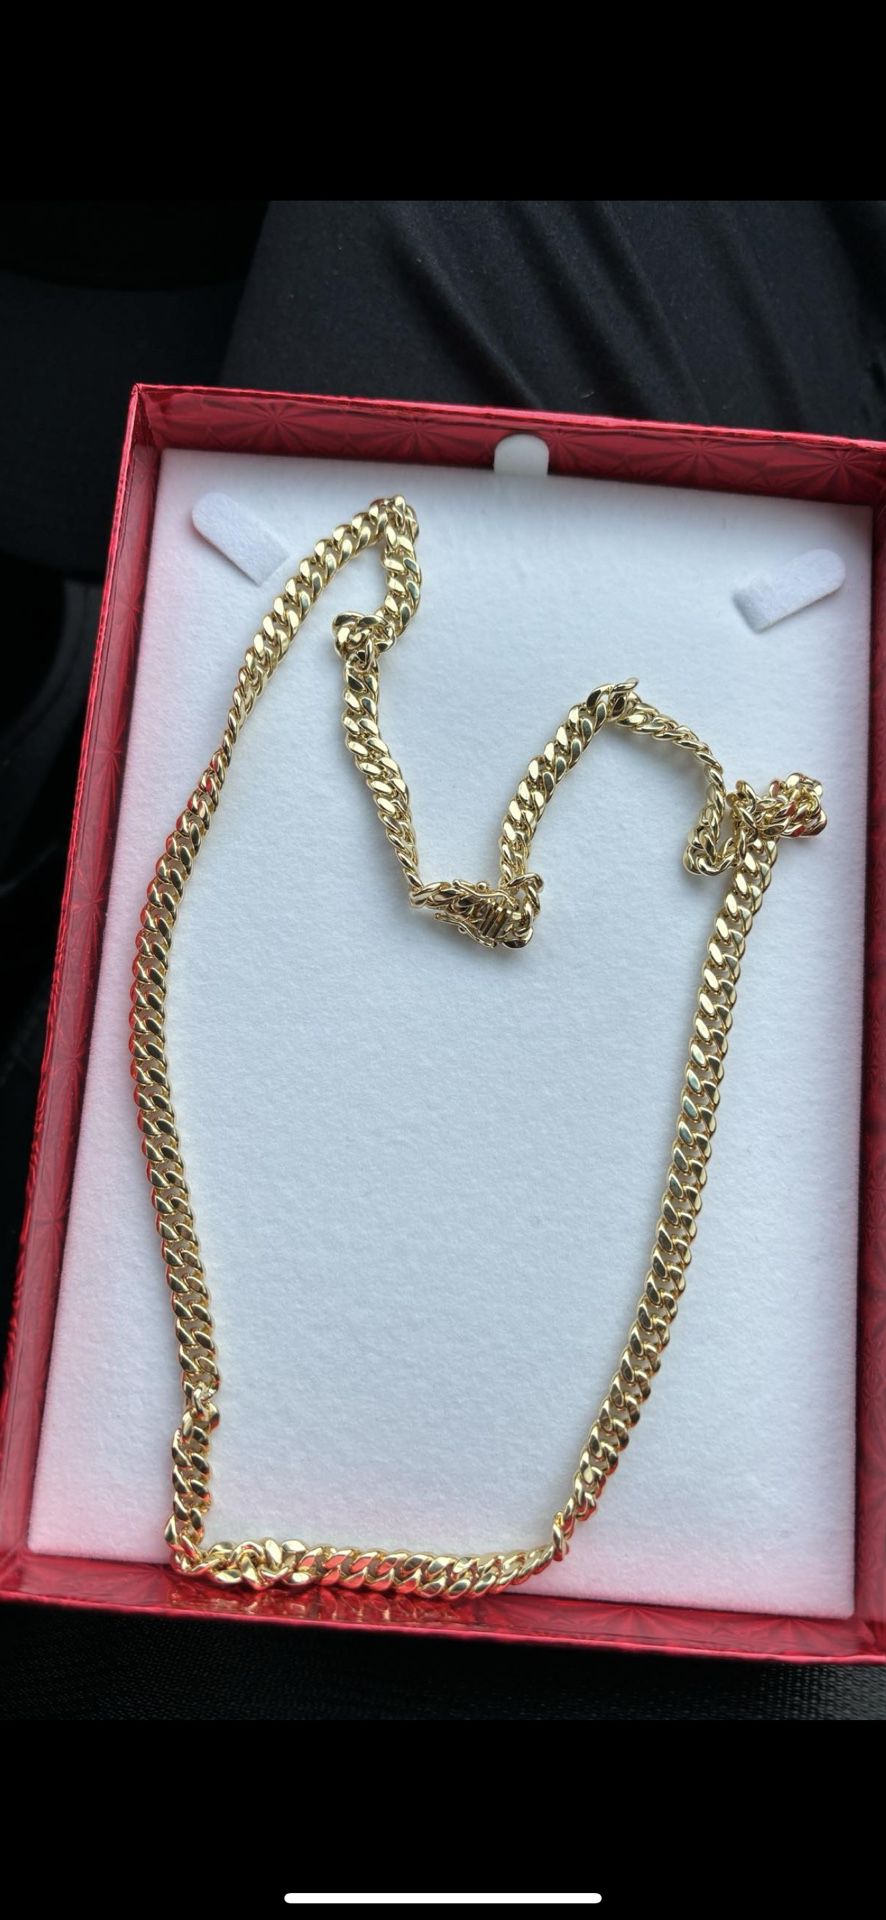 Cuban Gold Chain 24” About 23 Grams 10kt Gold